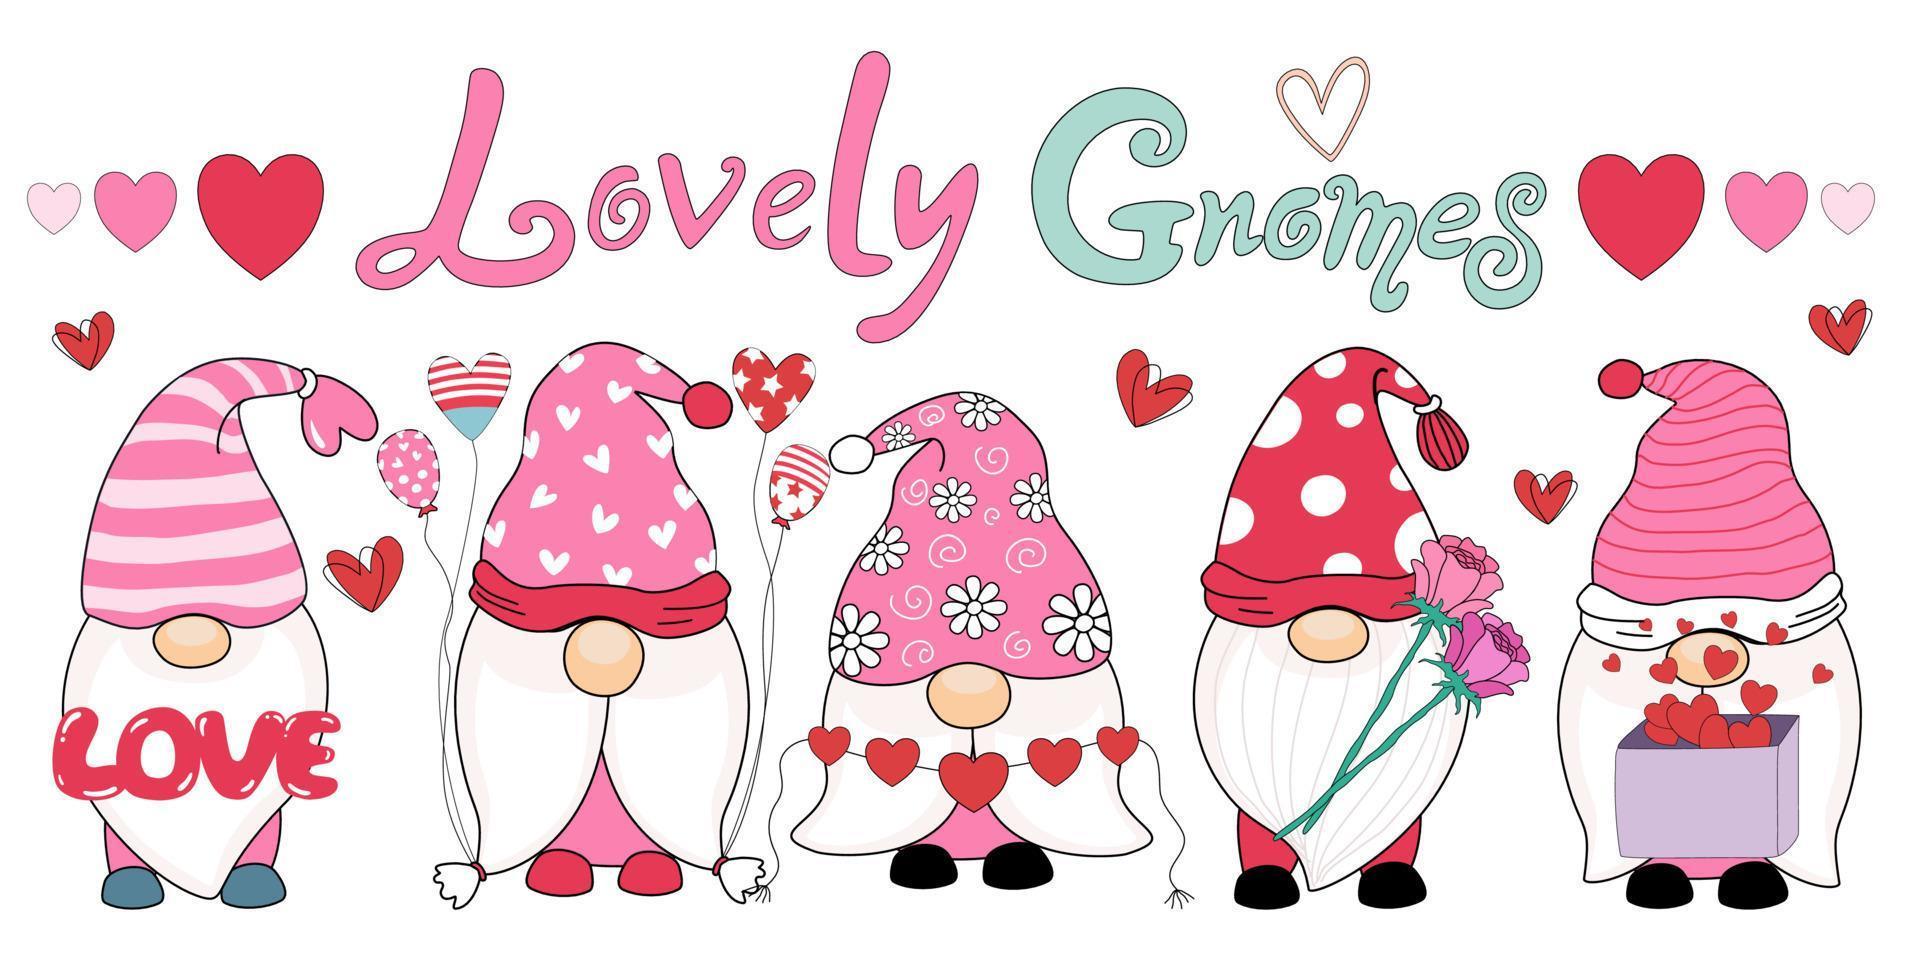 Vector illustration lovely gnomes characters in red and pink tones designed with doodle style